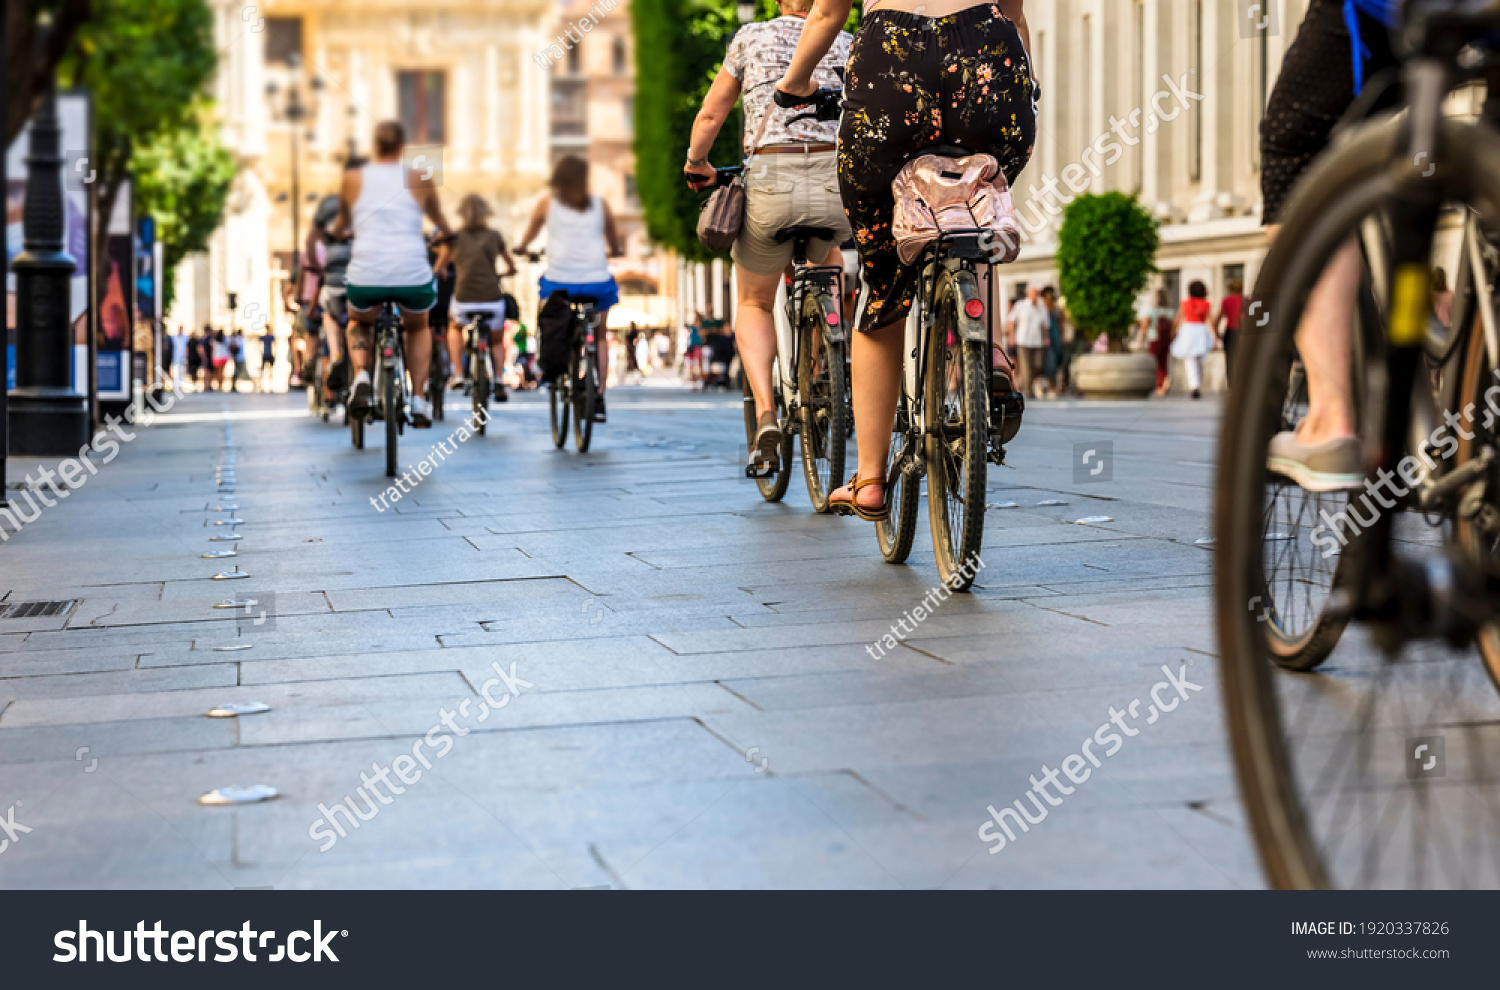 Many people in the city center in the pedestrian zone
who walk on foot and by bicycle #1920337826